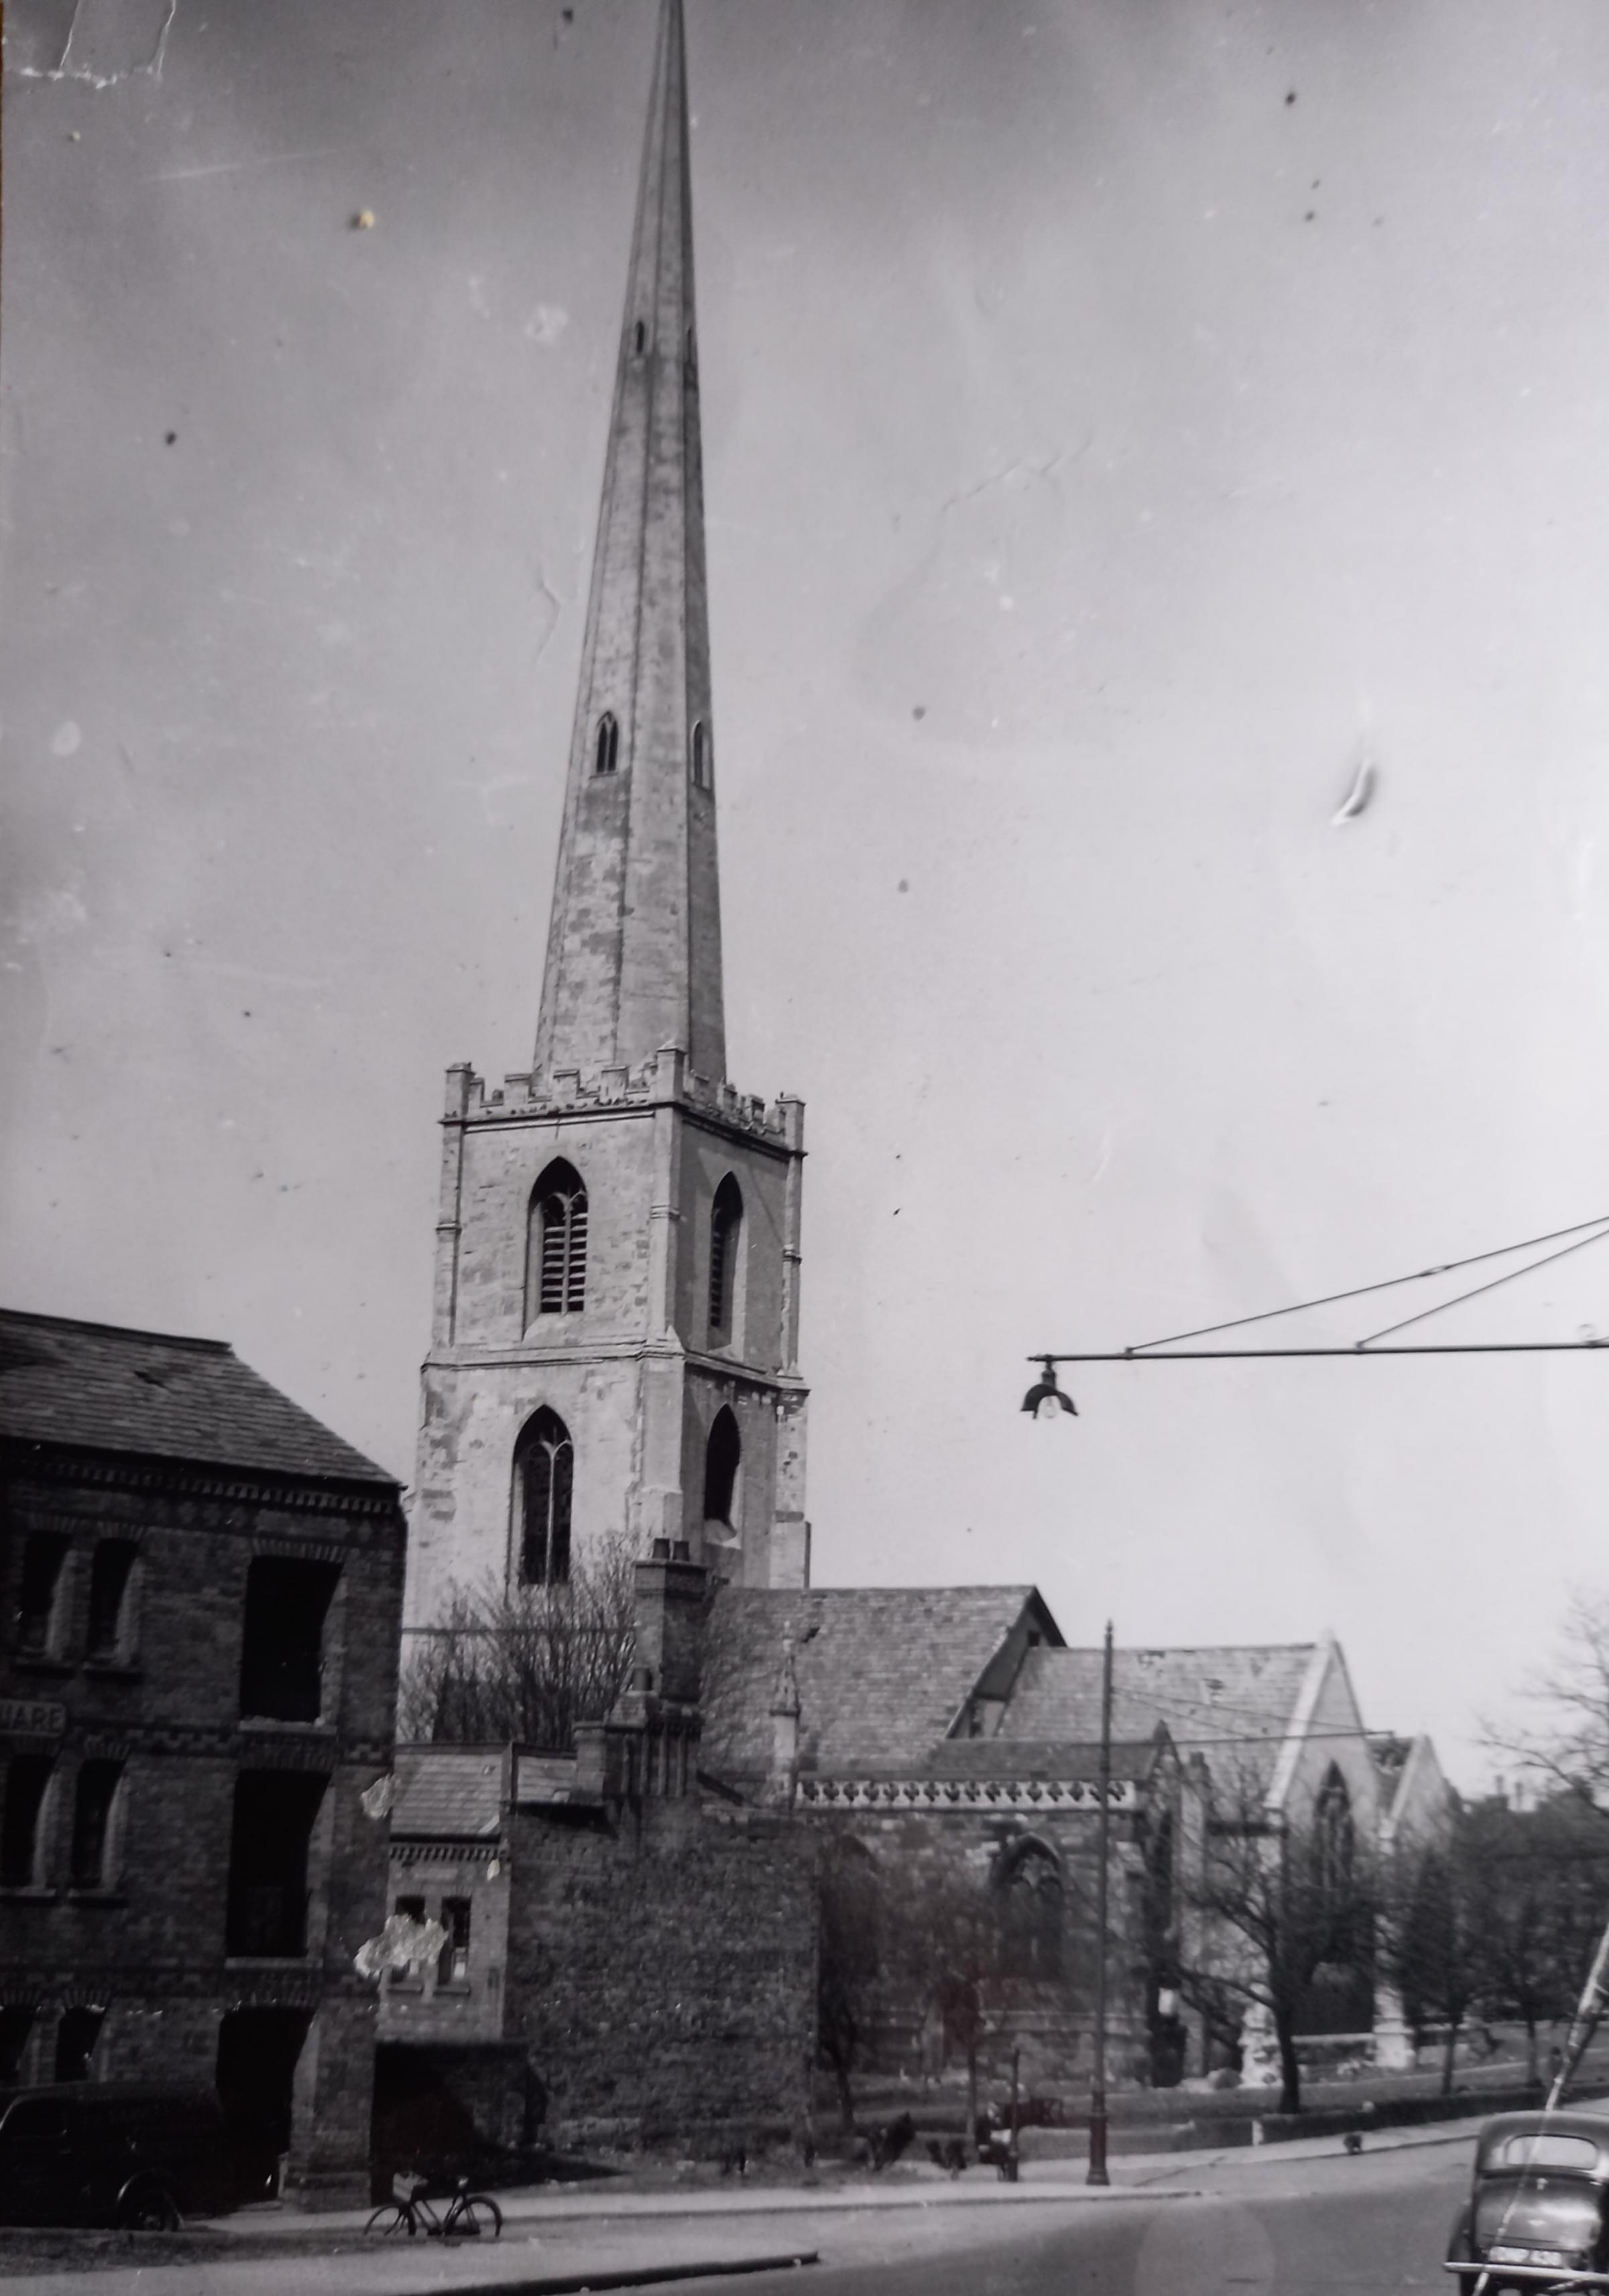 St Andrew’s Church and spire on Deansway The spire remains, but the church was demolished in 1949. There had been access through the church grounds to the smugglers’ cave